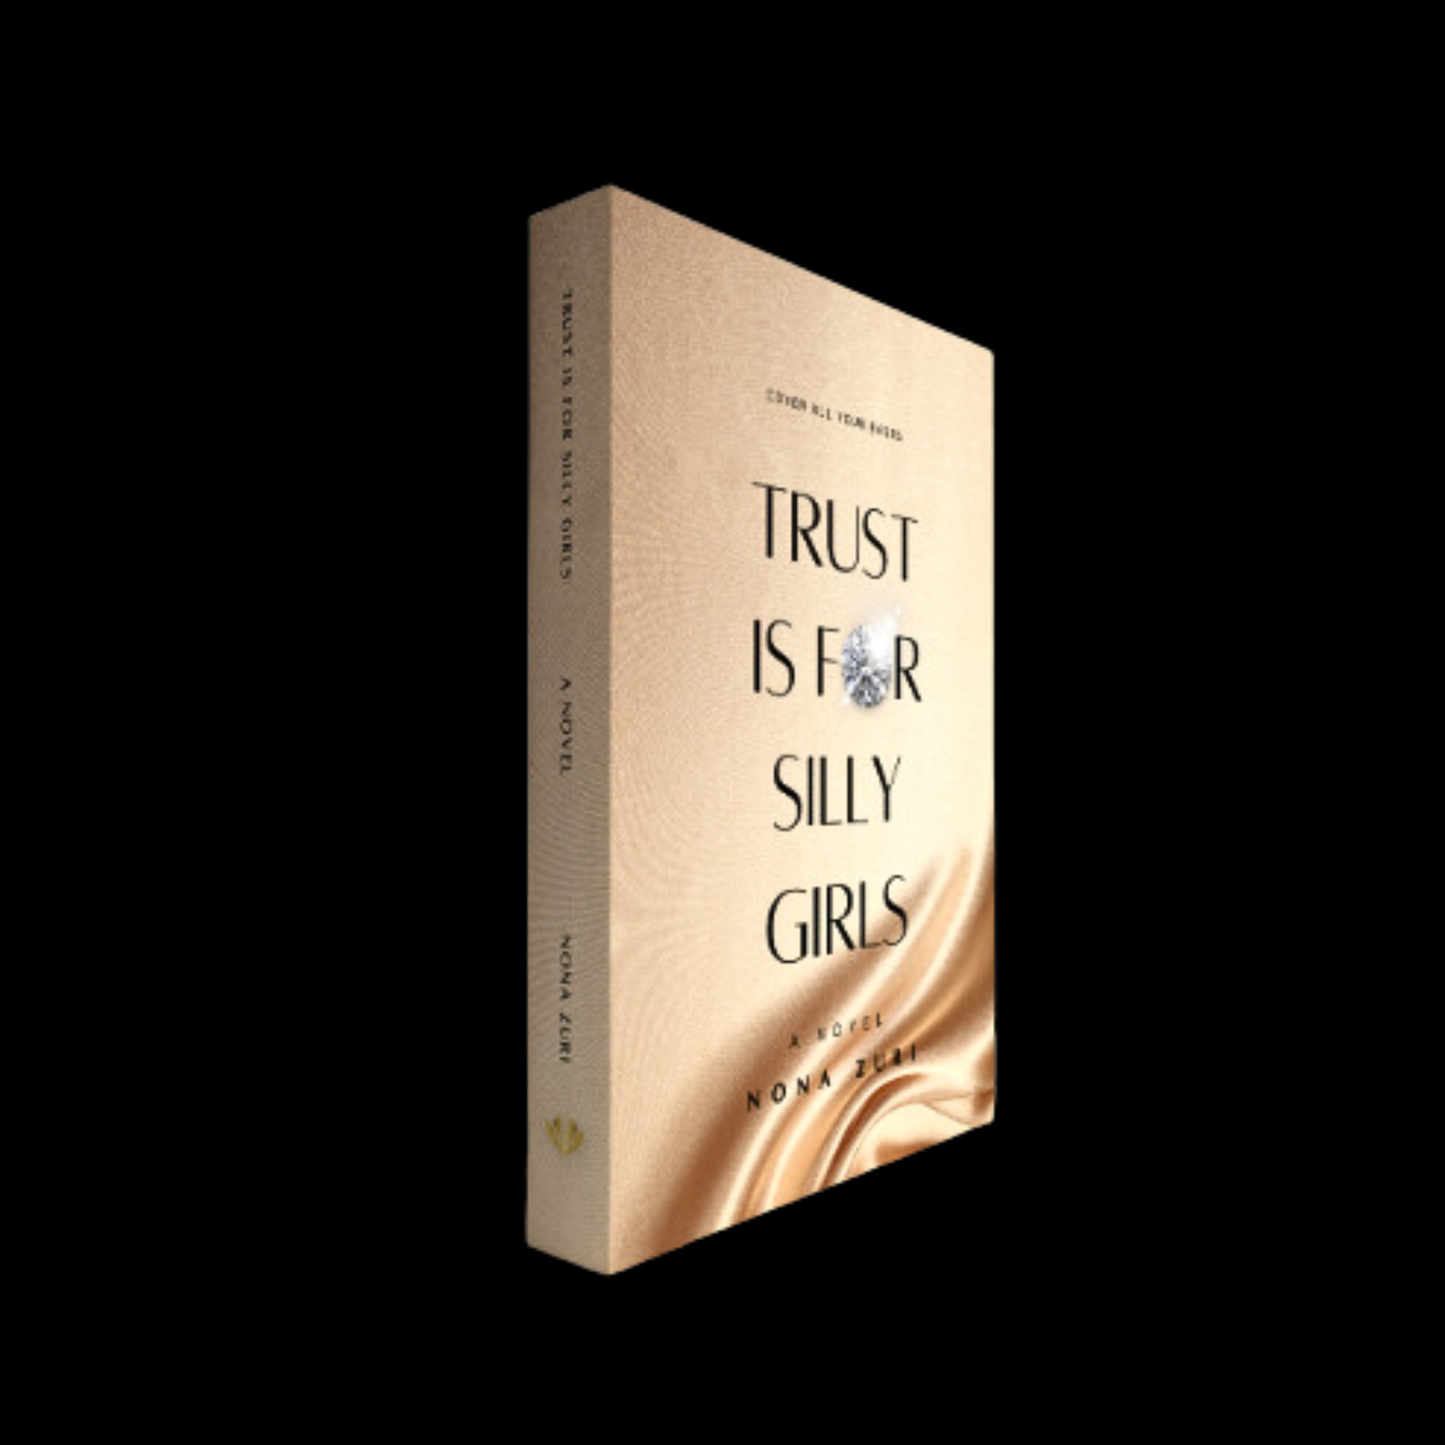 Trust is for Silly Girls - A novel by Nona Zuri